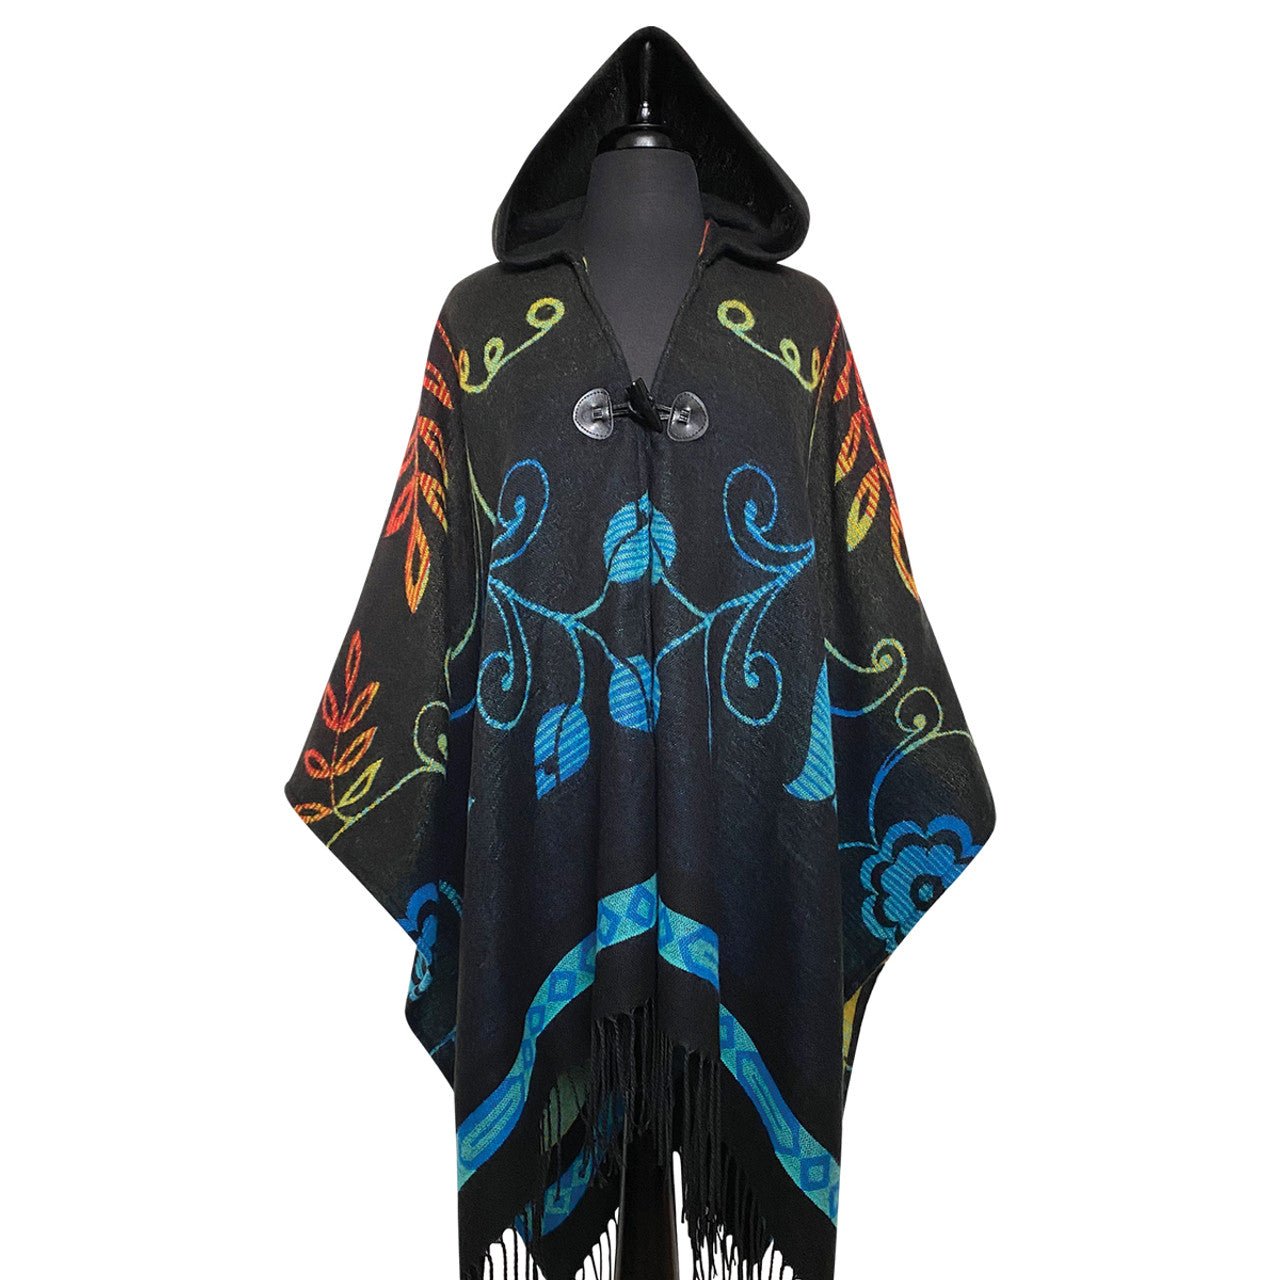 Hooded Fashion Wrap Honouring Our Life Givers